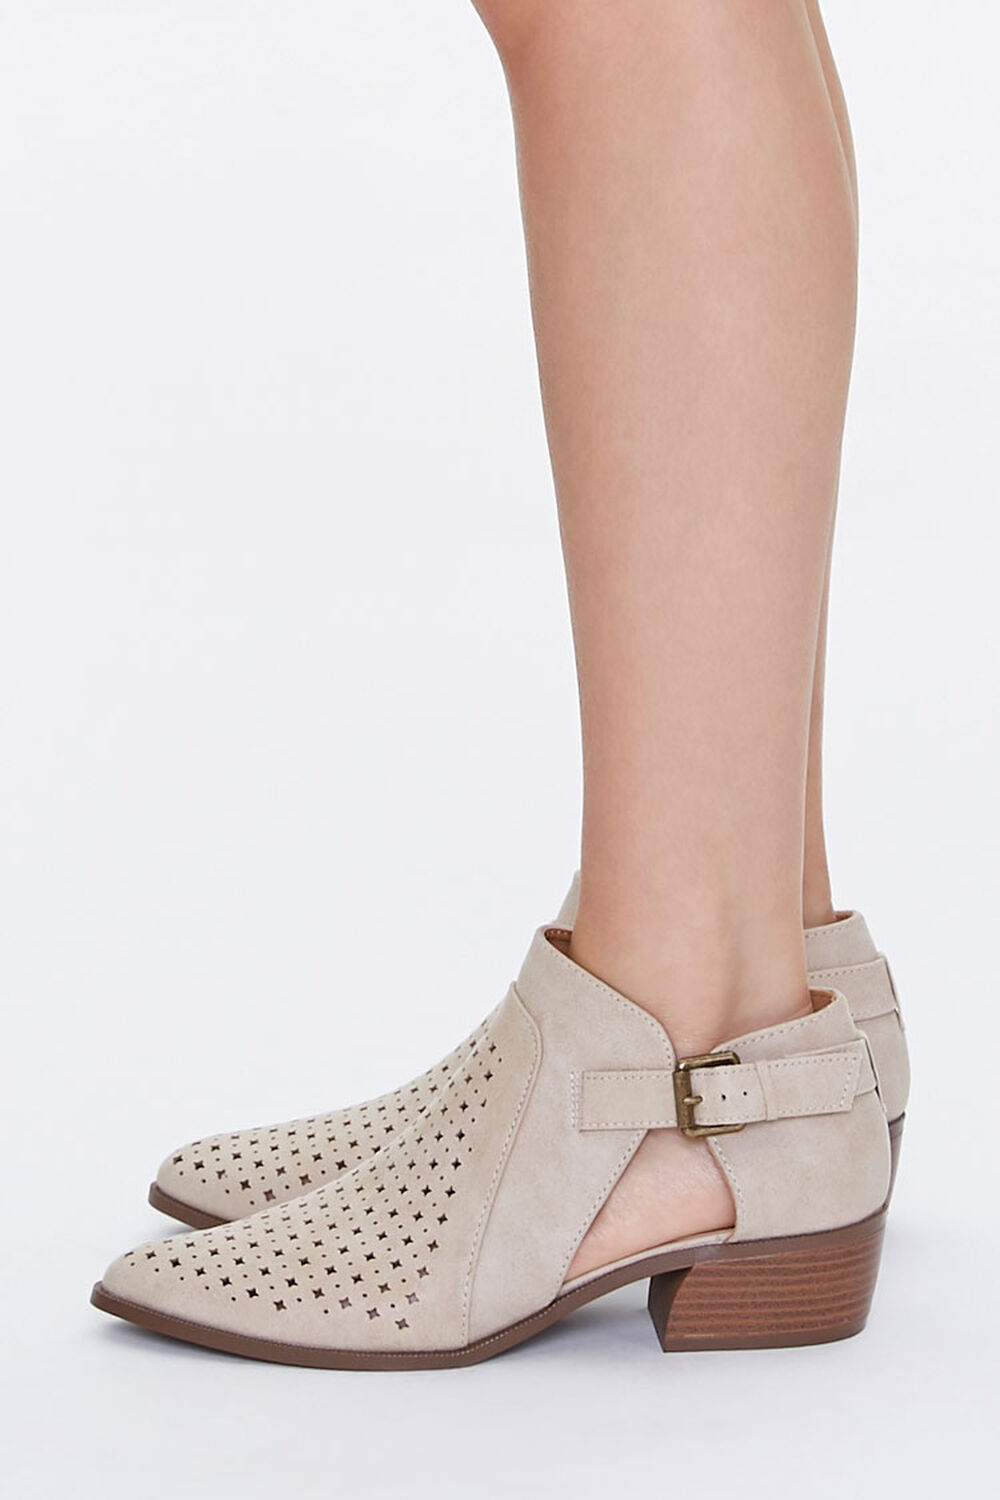 Perforated Buckled Booties, image 2